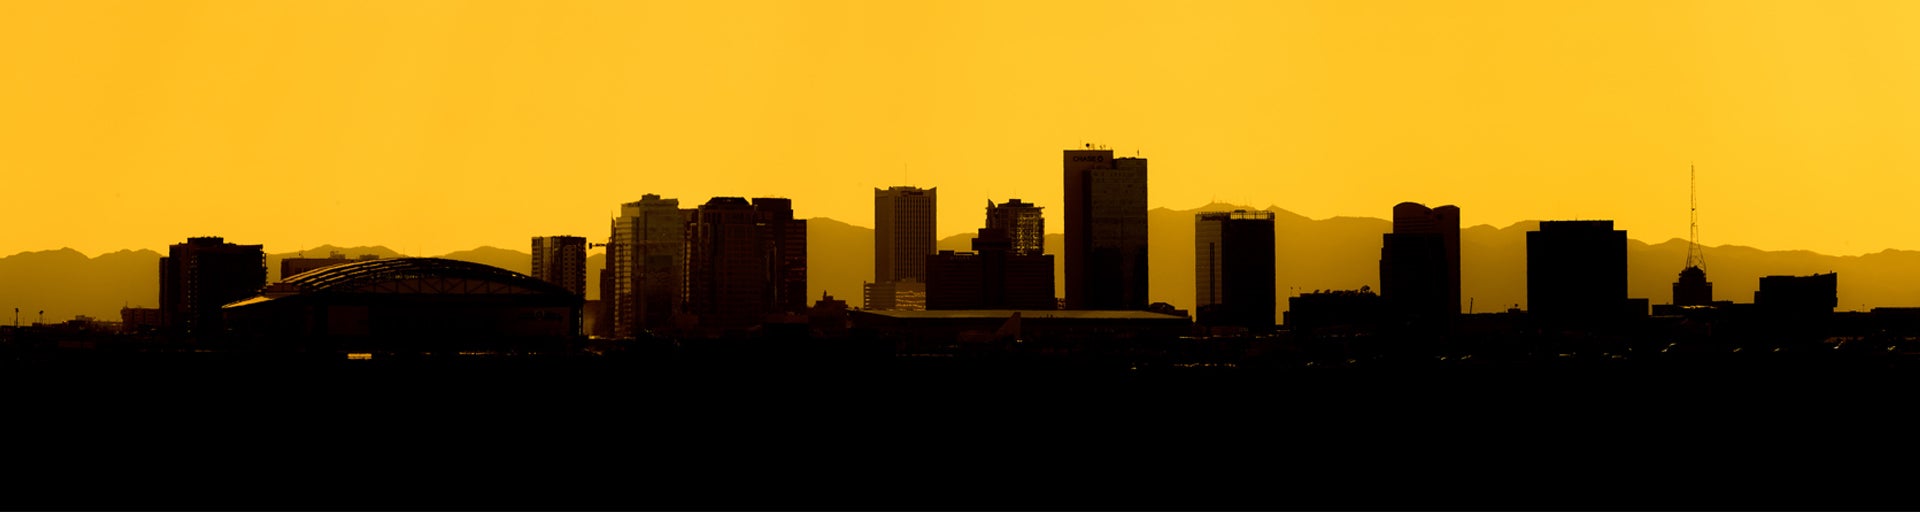 Downtown Phoenix silhouette with gold background